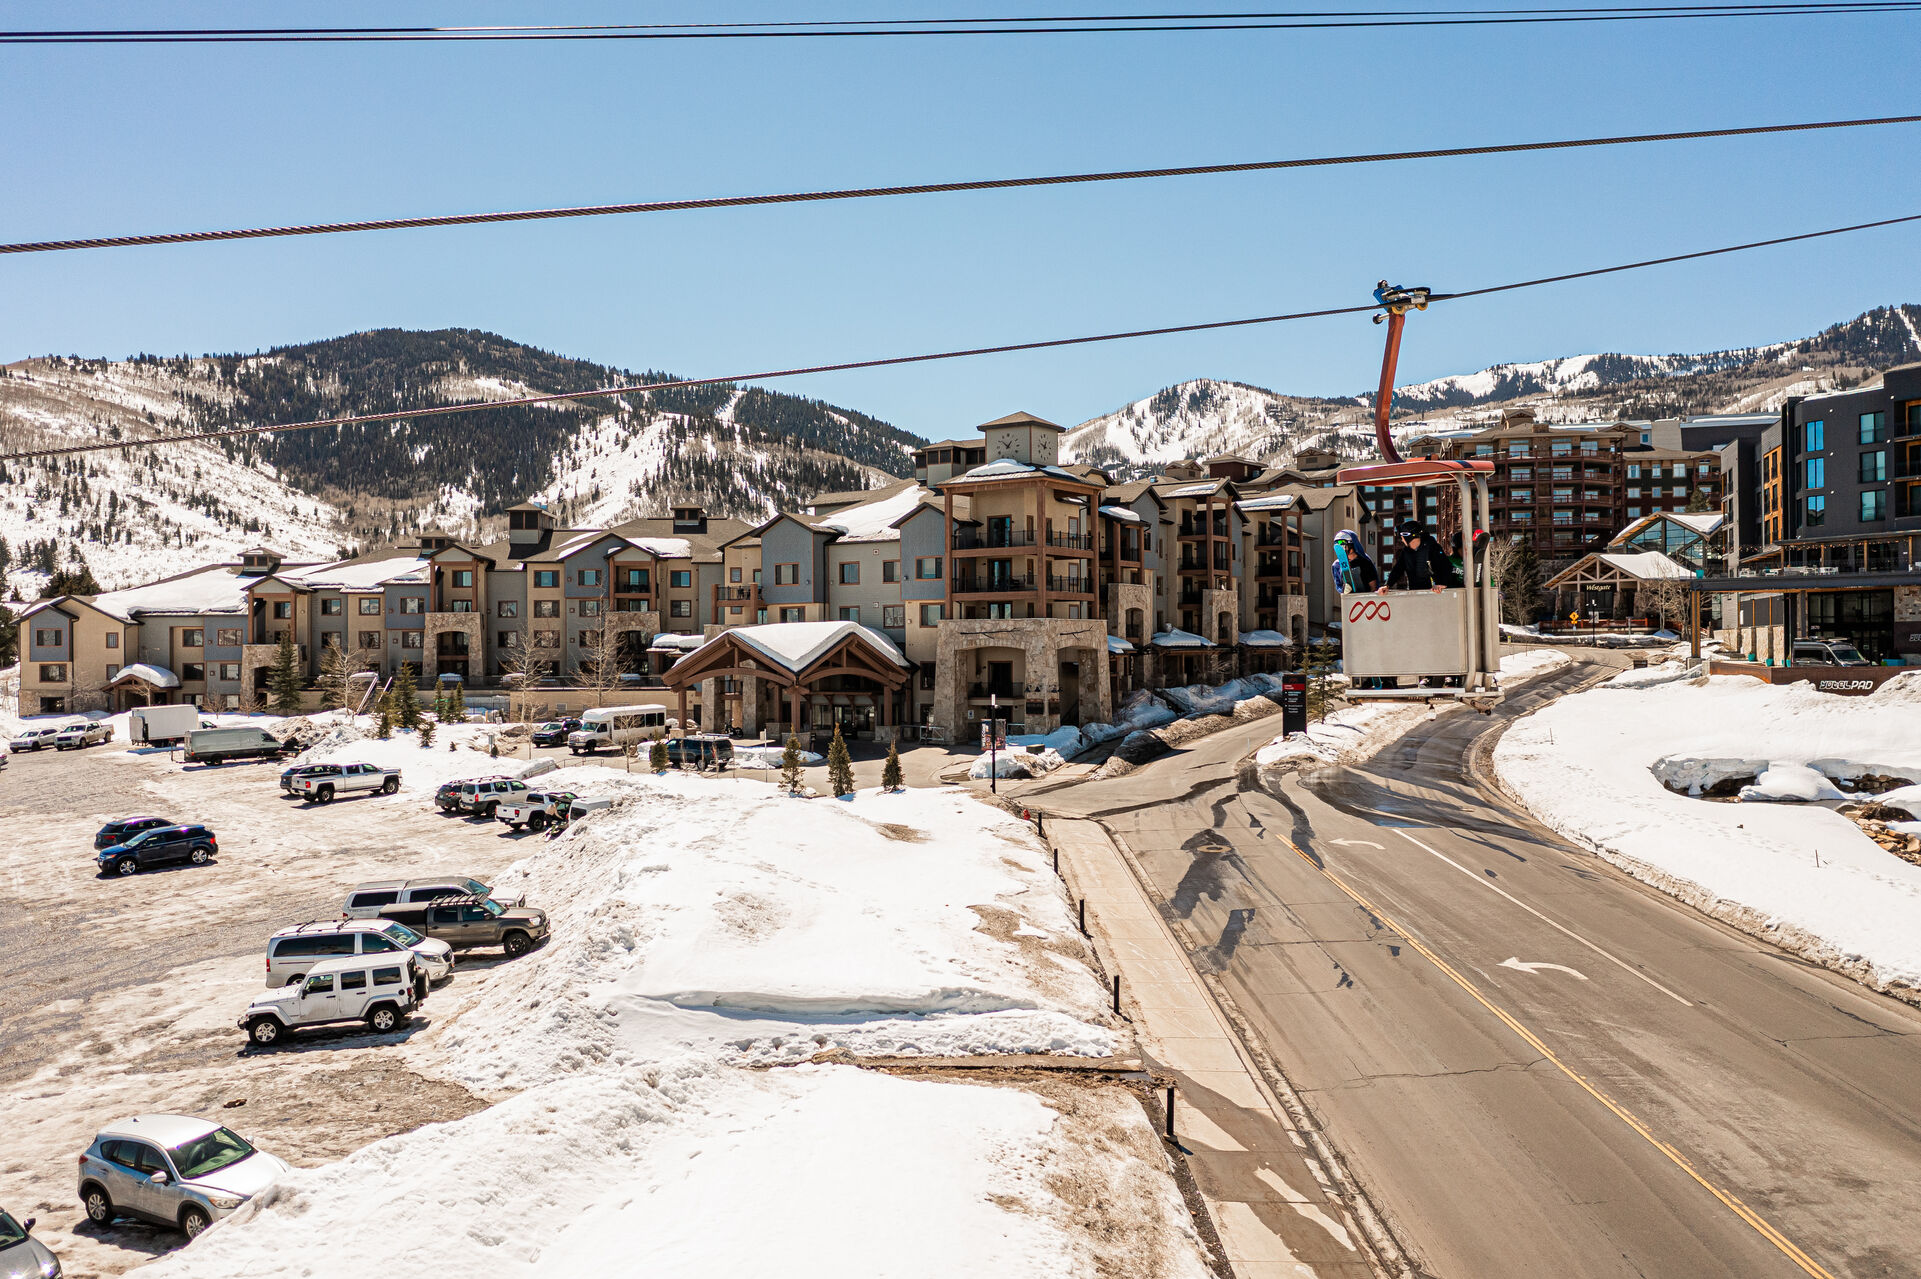 The Silverado Lodge and nearby ski lift and parking